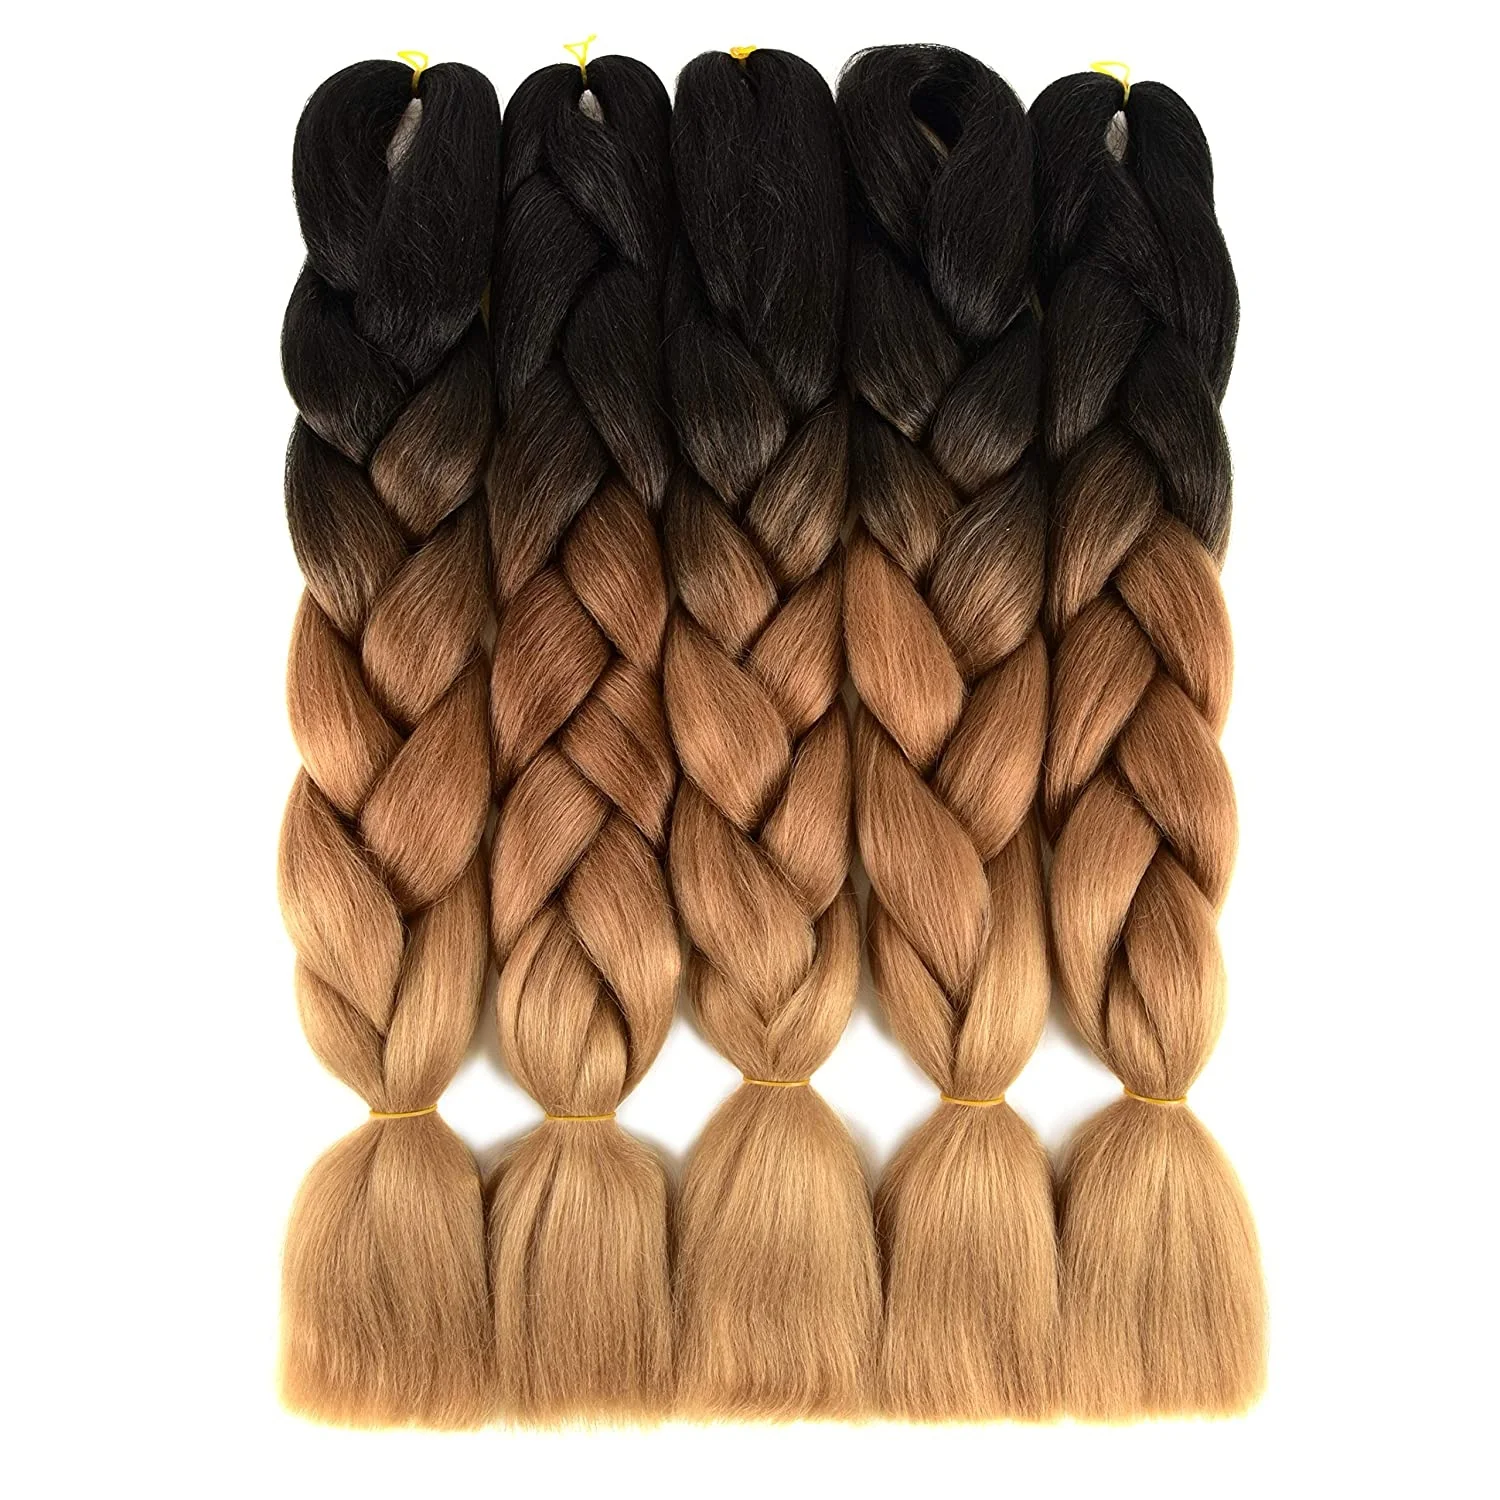 

Colorful Jumbo Braids Hair Extensions 24 Inch 3 Tone Jumbo Braiding Hair Synthetic Hair for Black Women, Per color and ombre color more than 85 color aviable